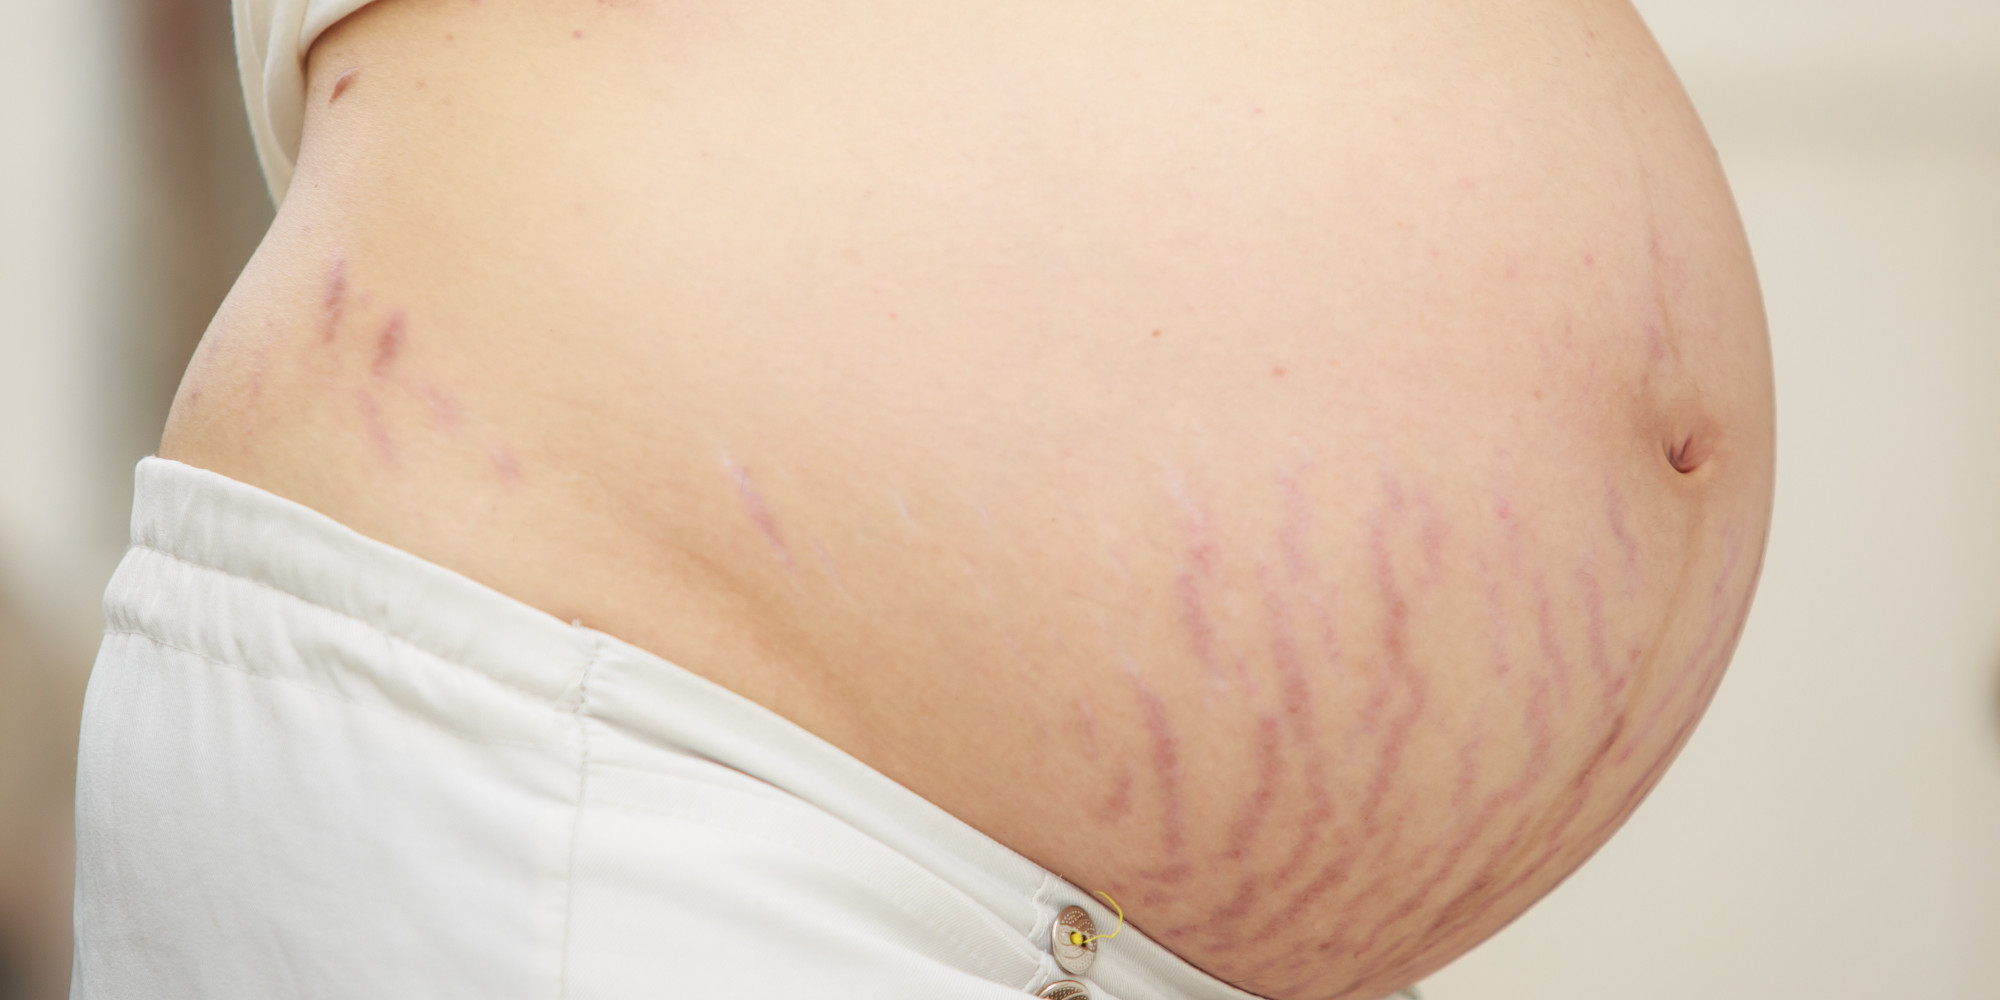 Hundreds of women share stretch-mark photos after Chrissy ...